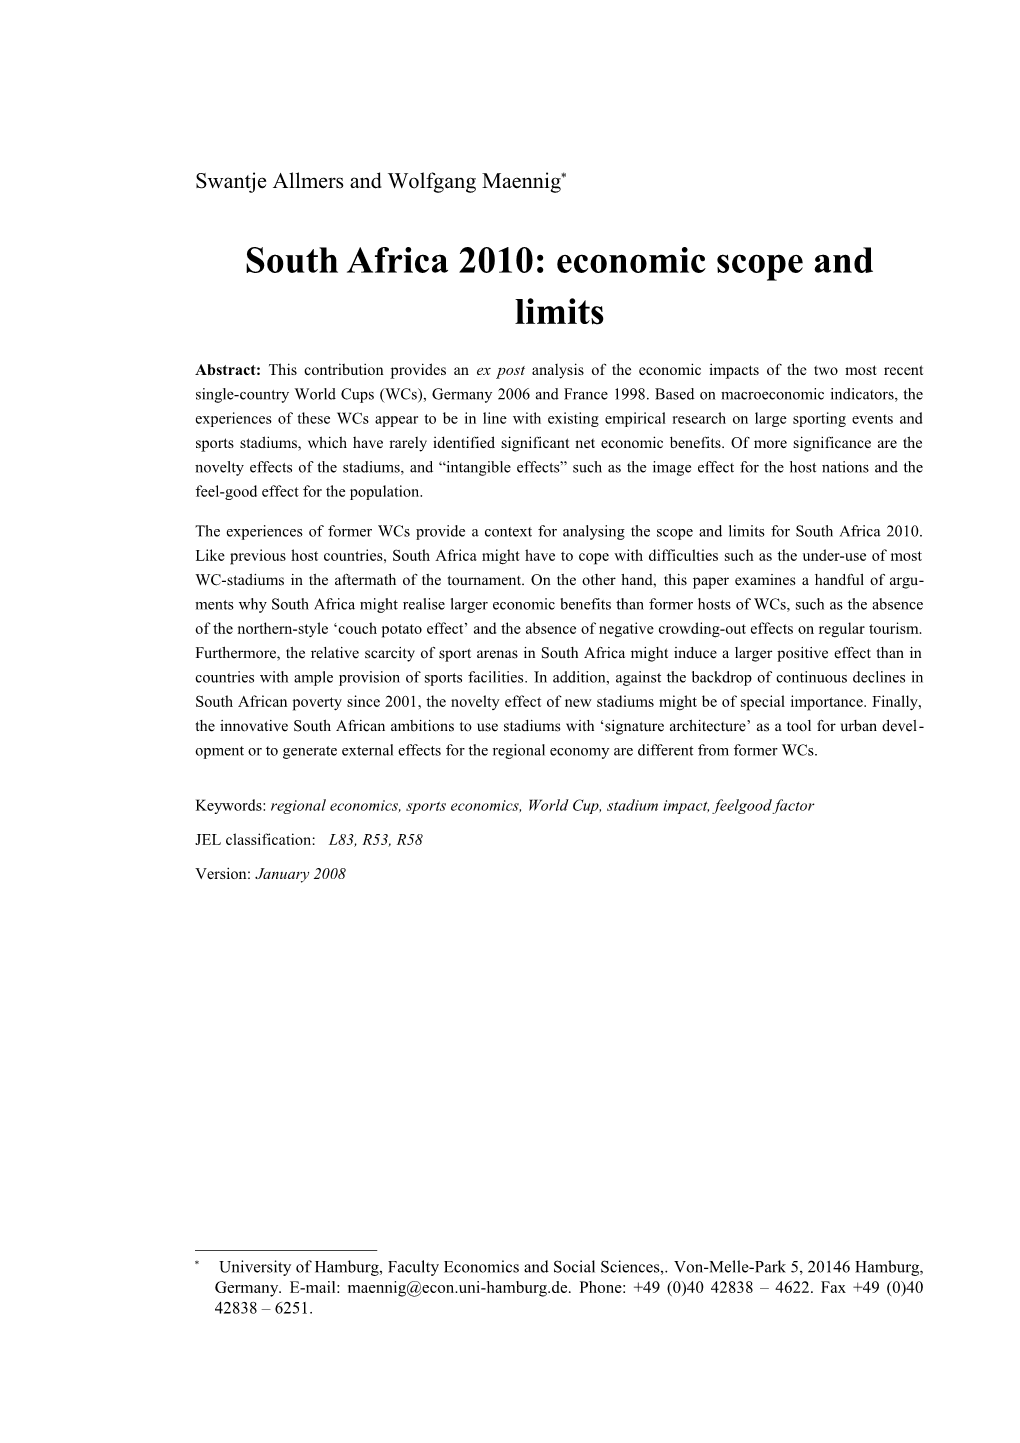 South Africa 2010: Economic Scope and Limits